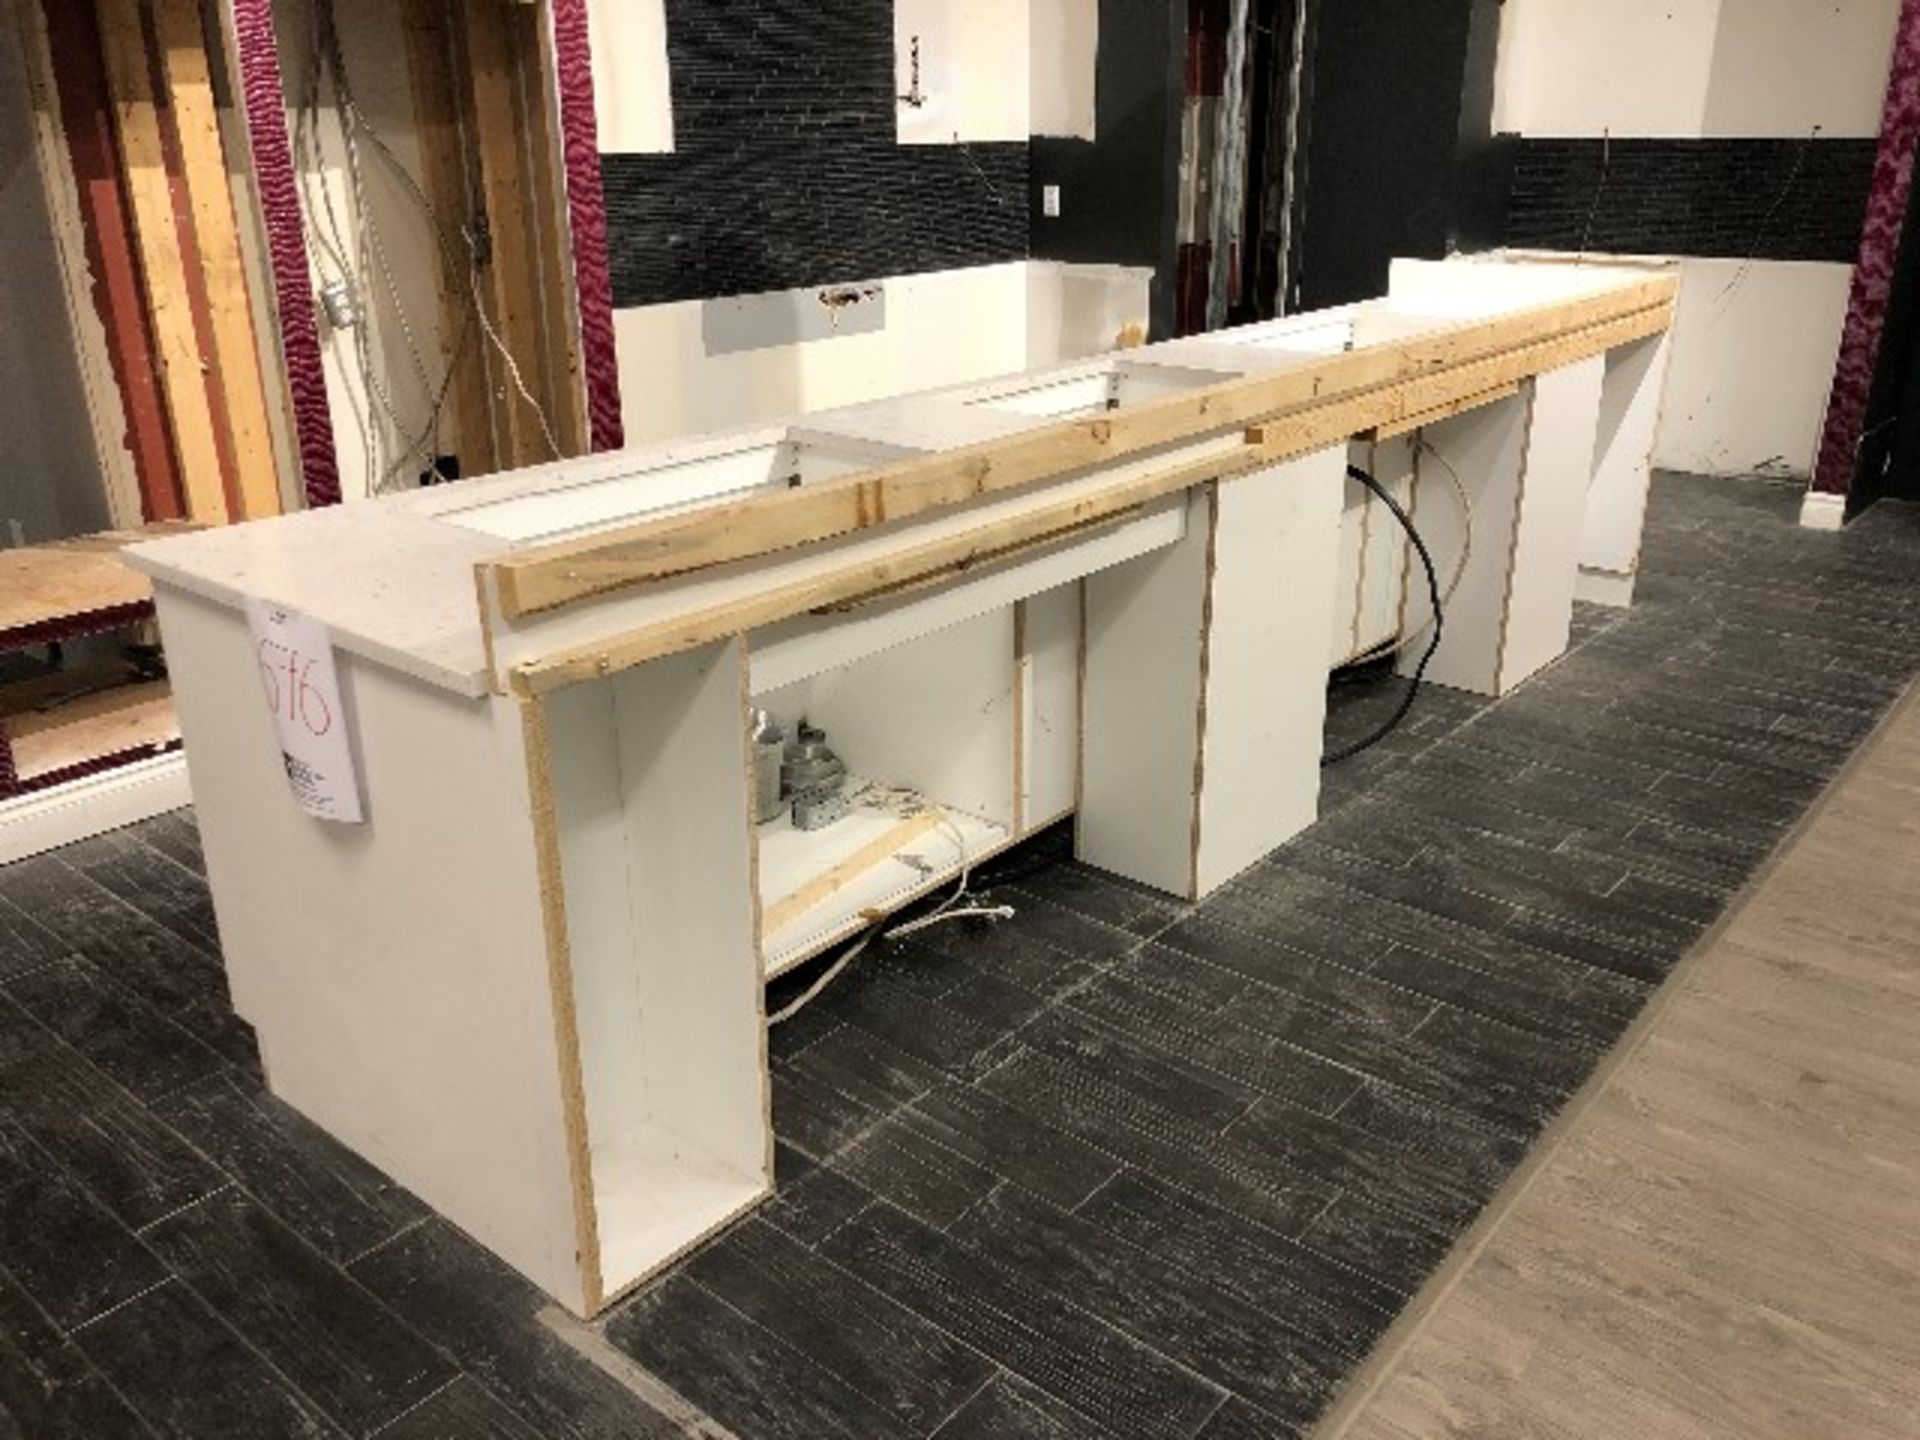 LOT: Kitchen countertop display, 7 modules - Image 3 of 3